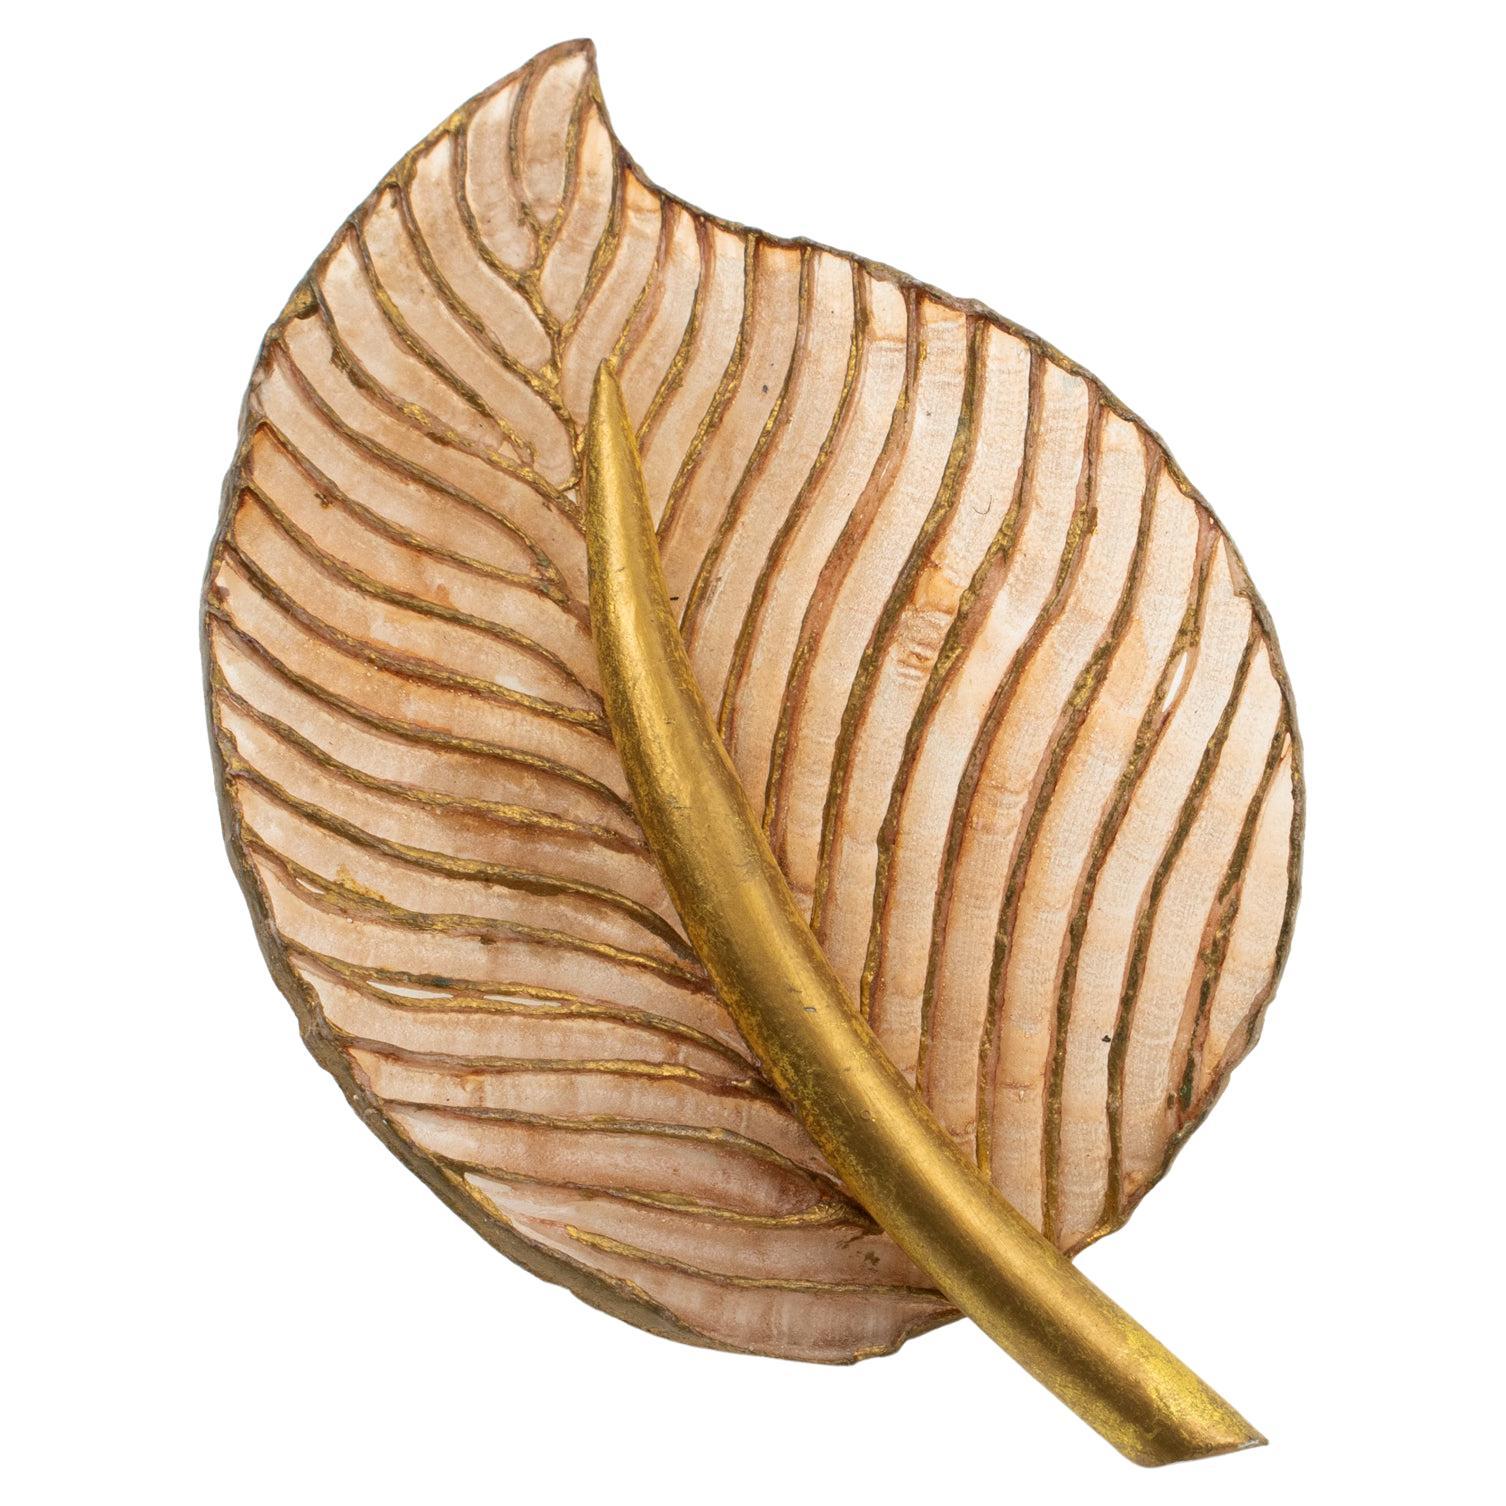 Francoise Montague by Cilea Resin Pin Brooch Golden Brown Leaf For Sale